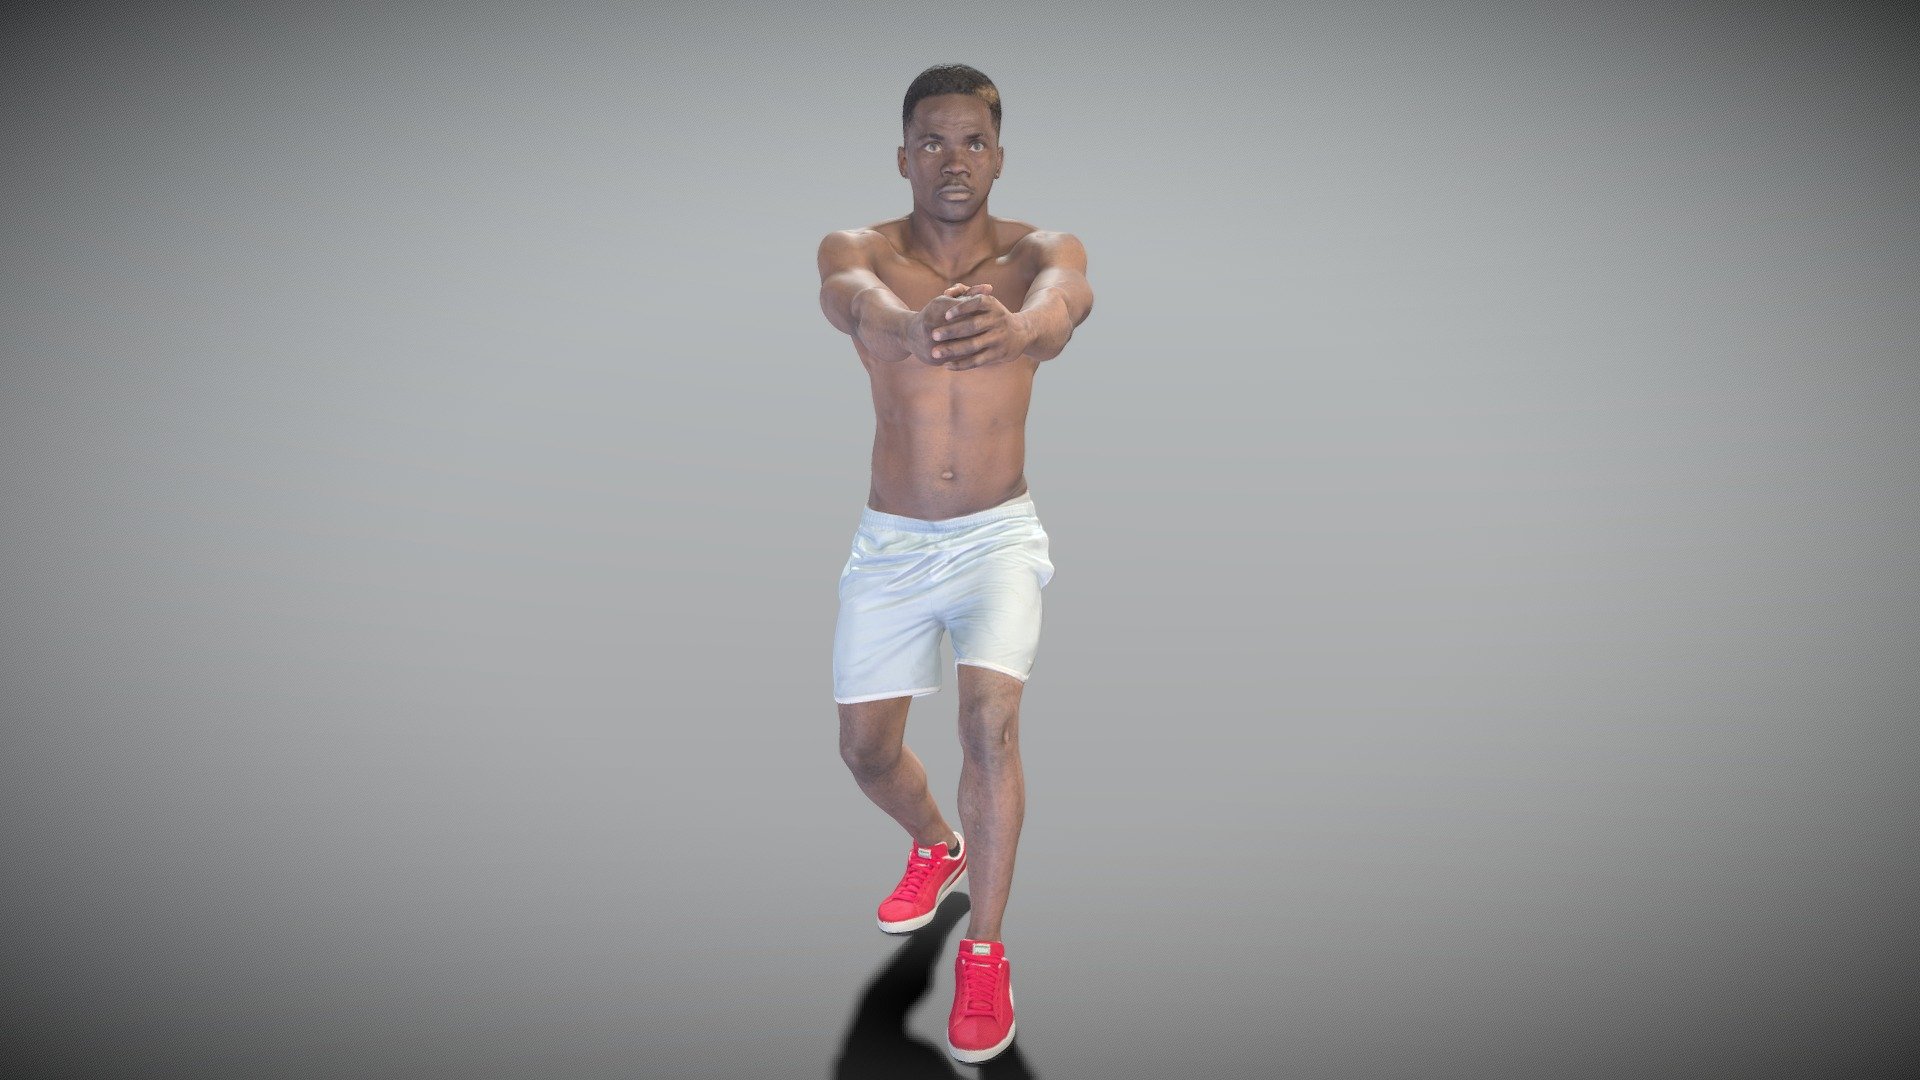 This is a true human size and detailed model of a sporty handsome young man of African appearance dressed in swimming trunks. The model is captured in casual pose to be perfectly matching for variety of architectural visualizations, e.g. beach, sport ground, gym, park, VR/AR content, etc.

The product is ready both for immediate use in architectural visualisations, or further render and detailed sculpting in Zbrush.

Technical characteristics:




digital double 3d scan model

decimated model (100k triangles)

sufficiently clean

PBR textures: Diffuse, Normal, Specular maps

non-overlapping UV map

Download package includes Cinema 4D project file with Redshift shader, OBJ, FBX files, which are applicable for 3ds Max, Maya, Unreal Engine, Unity, Blender, etc. All the textures you will find in the Tex folder, included into the main archive.

You may find some of our 3d models in free access on SketchFab https://sketchfab.com/deep3dstudio/collections/sample-basic-3d-models

New 3d models every day! - African guy playing volleyball 338 - Buy Royalty Free 3D model by deep3dstudio 3d model